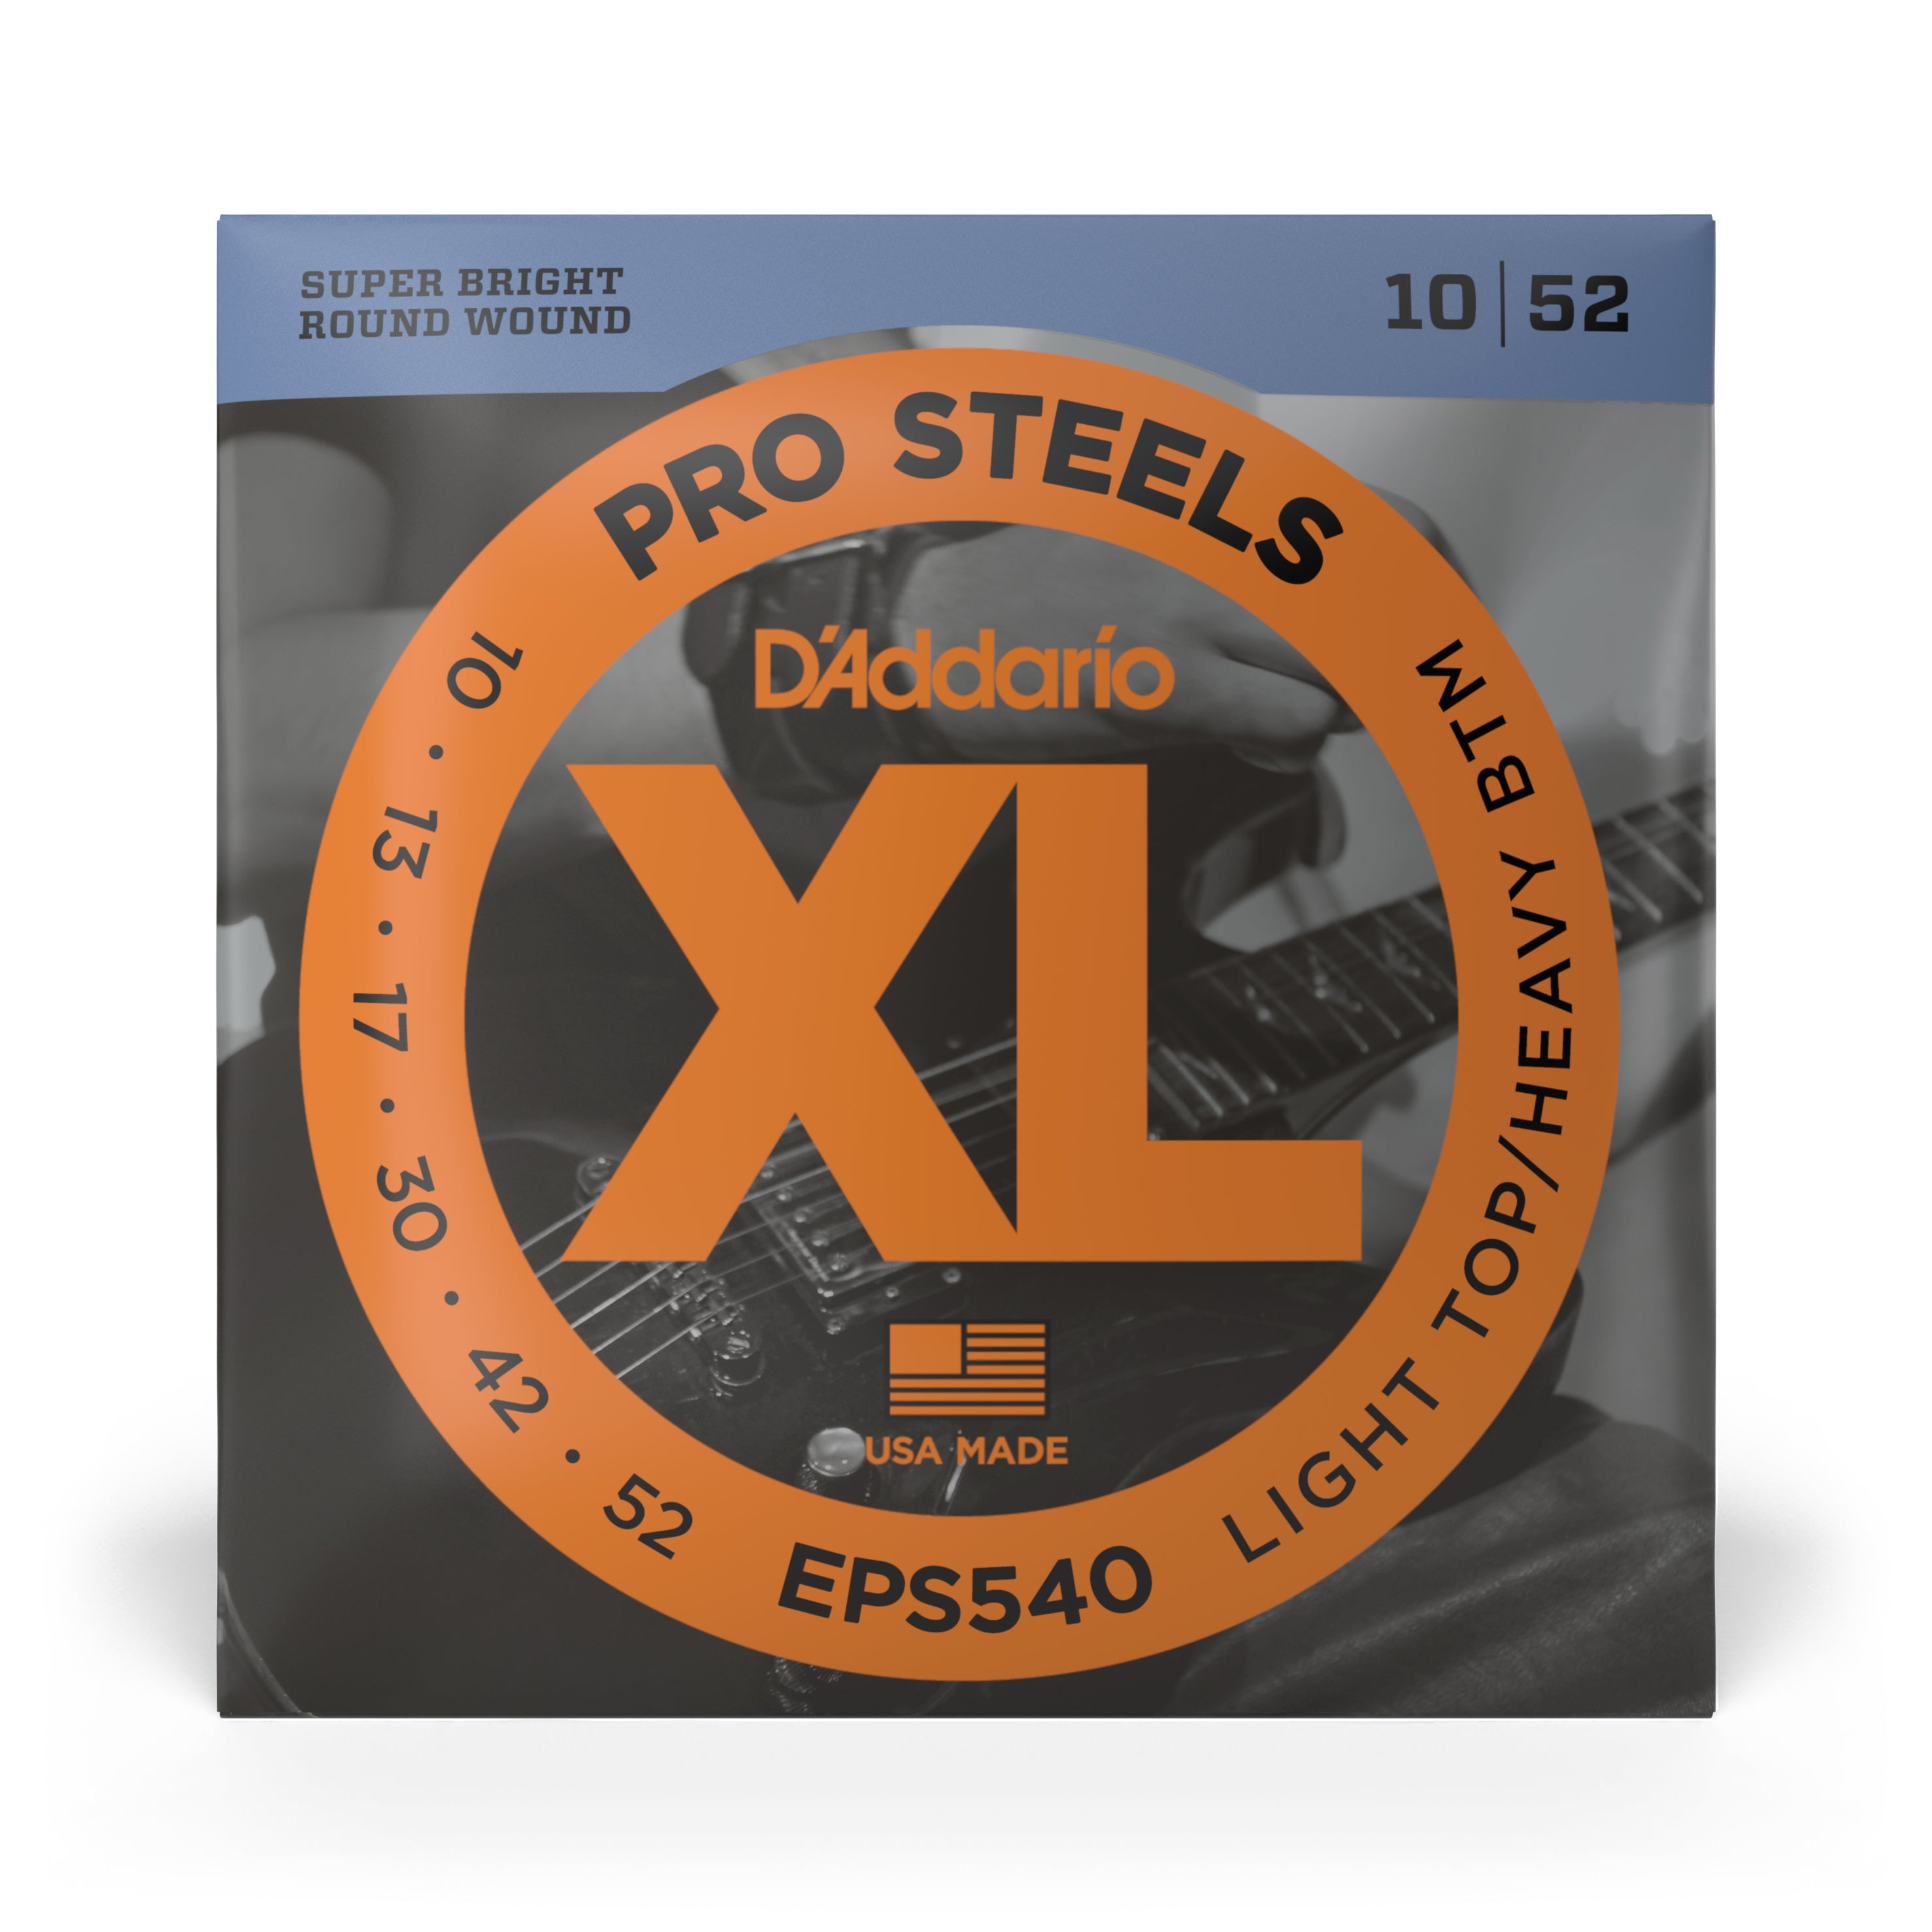 D'Addario Pro Steels Stainless Steel 10-52 Electric Guitar Strings, Light Top Heavy Bottom